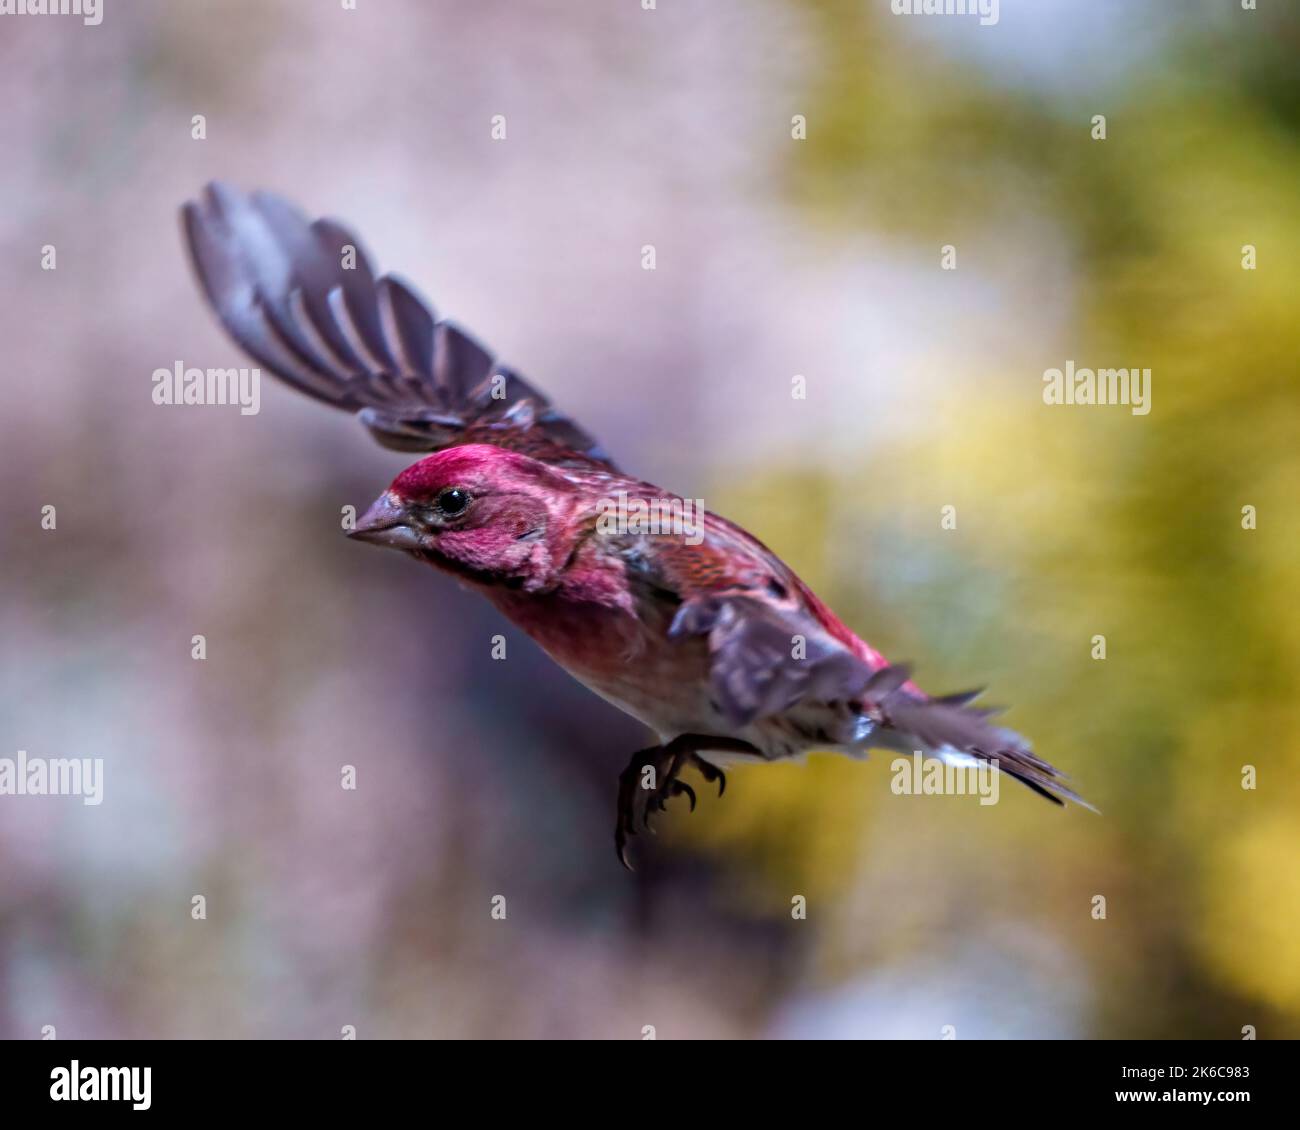 Finch male flying with its beautiful red colour spread wings with a blur background in its environment and habitat surrounding. Bird flight. Stock Photo